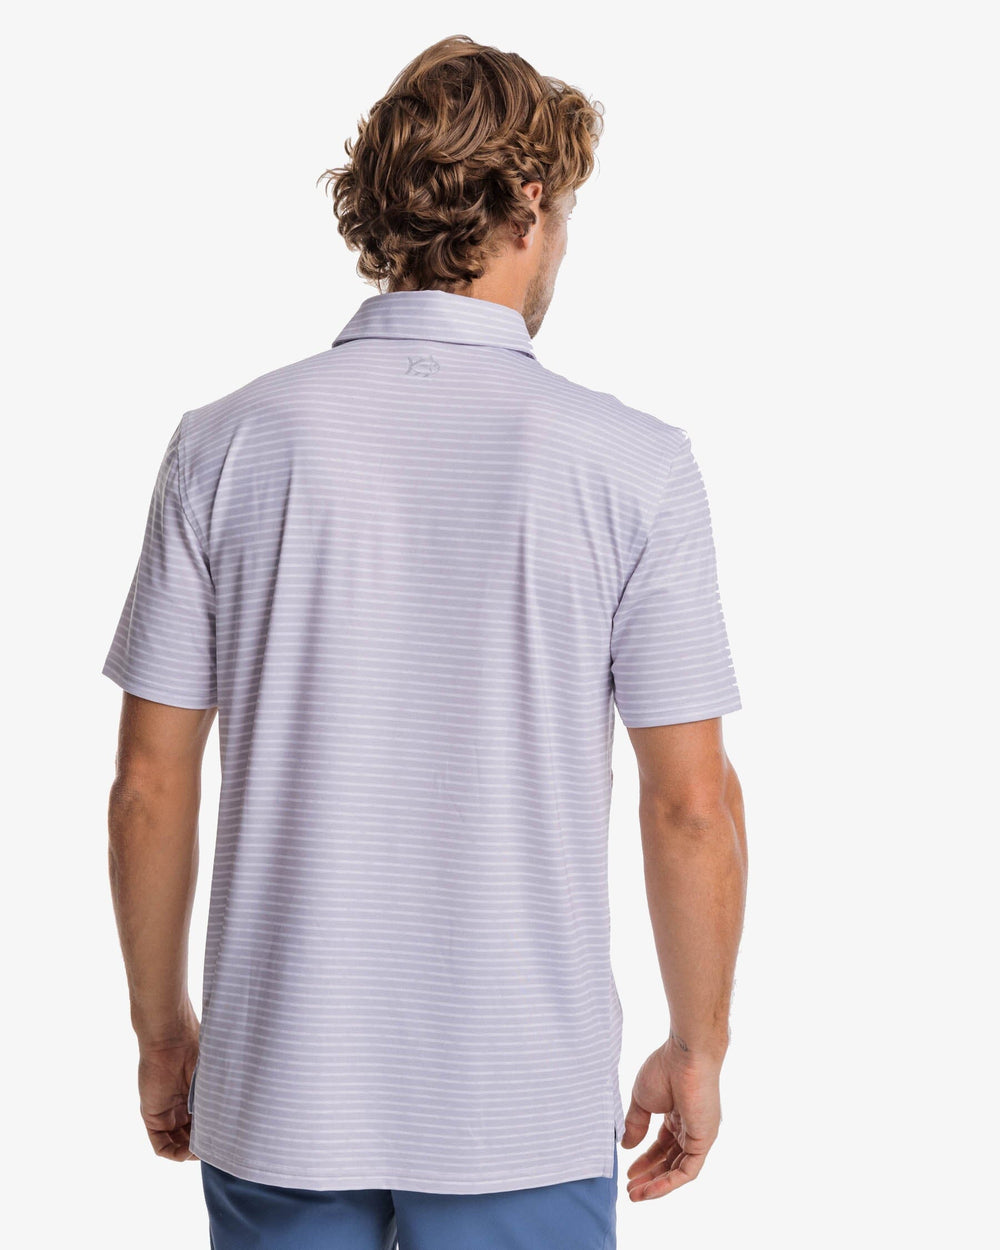 The back view of the Southern Tide Driver Wymberly Stripe Performance Polo Shirt by Southern Tide - Slate Grey